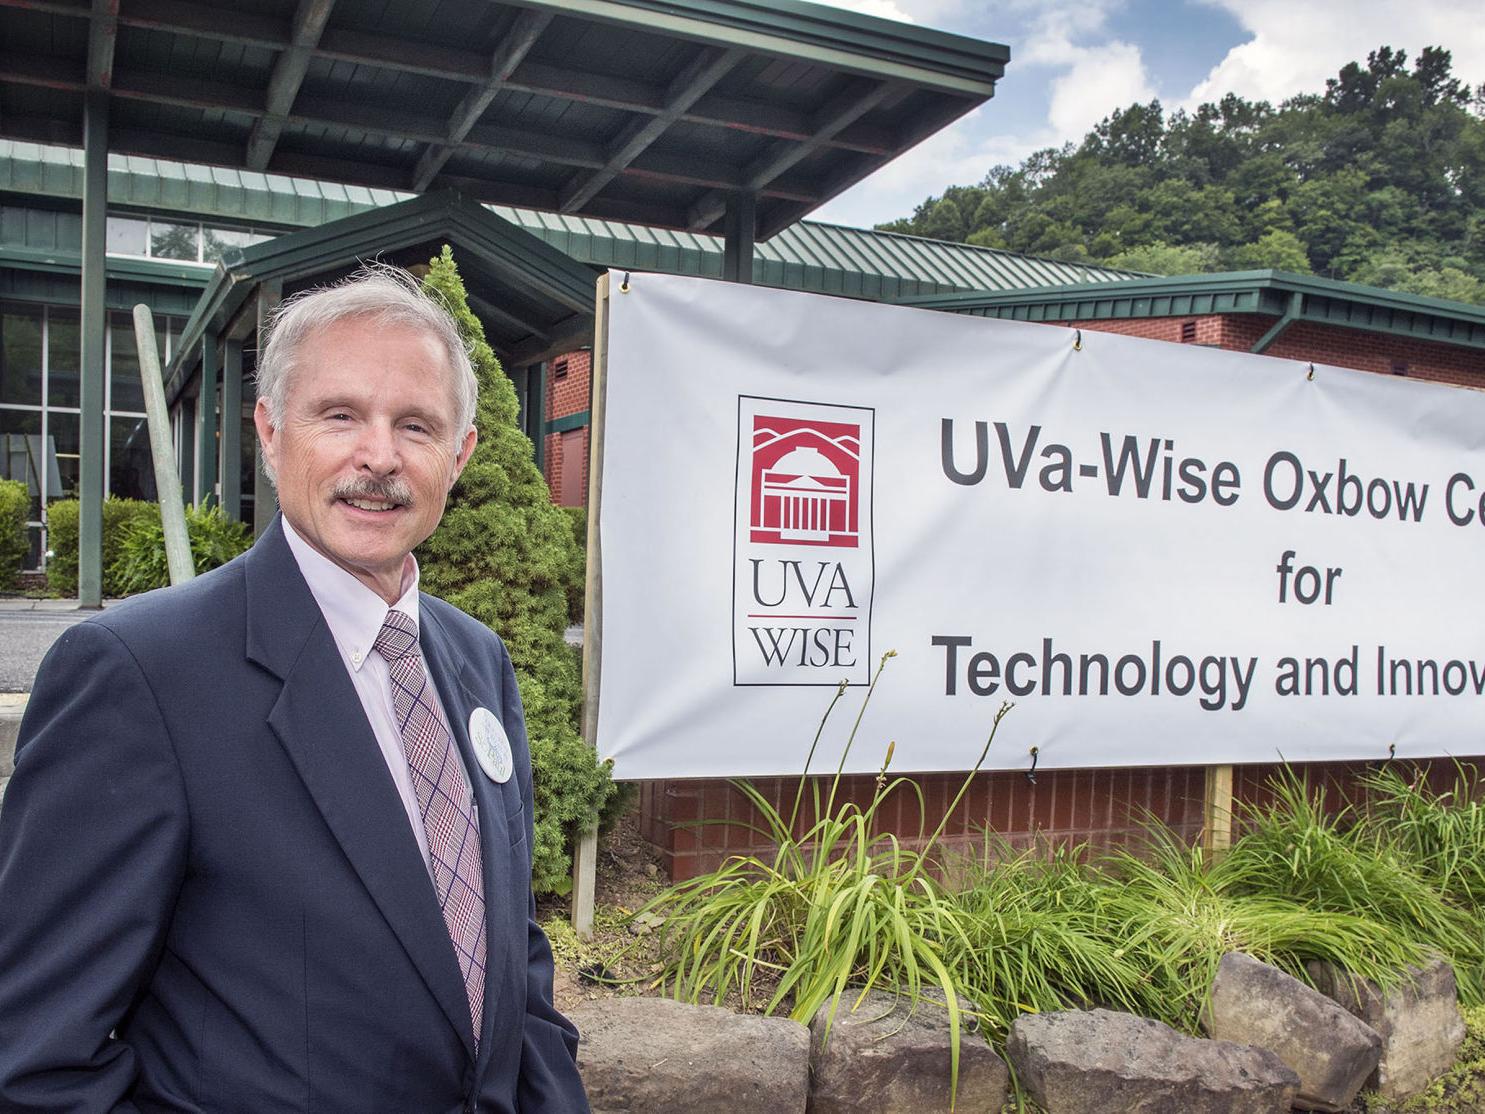 Uva Wise Announces Development At The Oxbow Center In St Paul State Dailyprogress Com